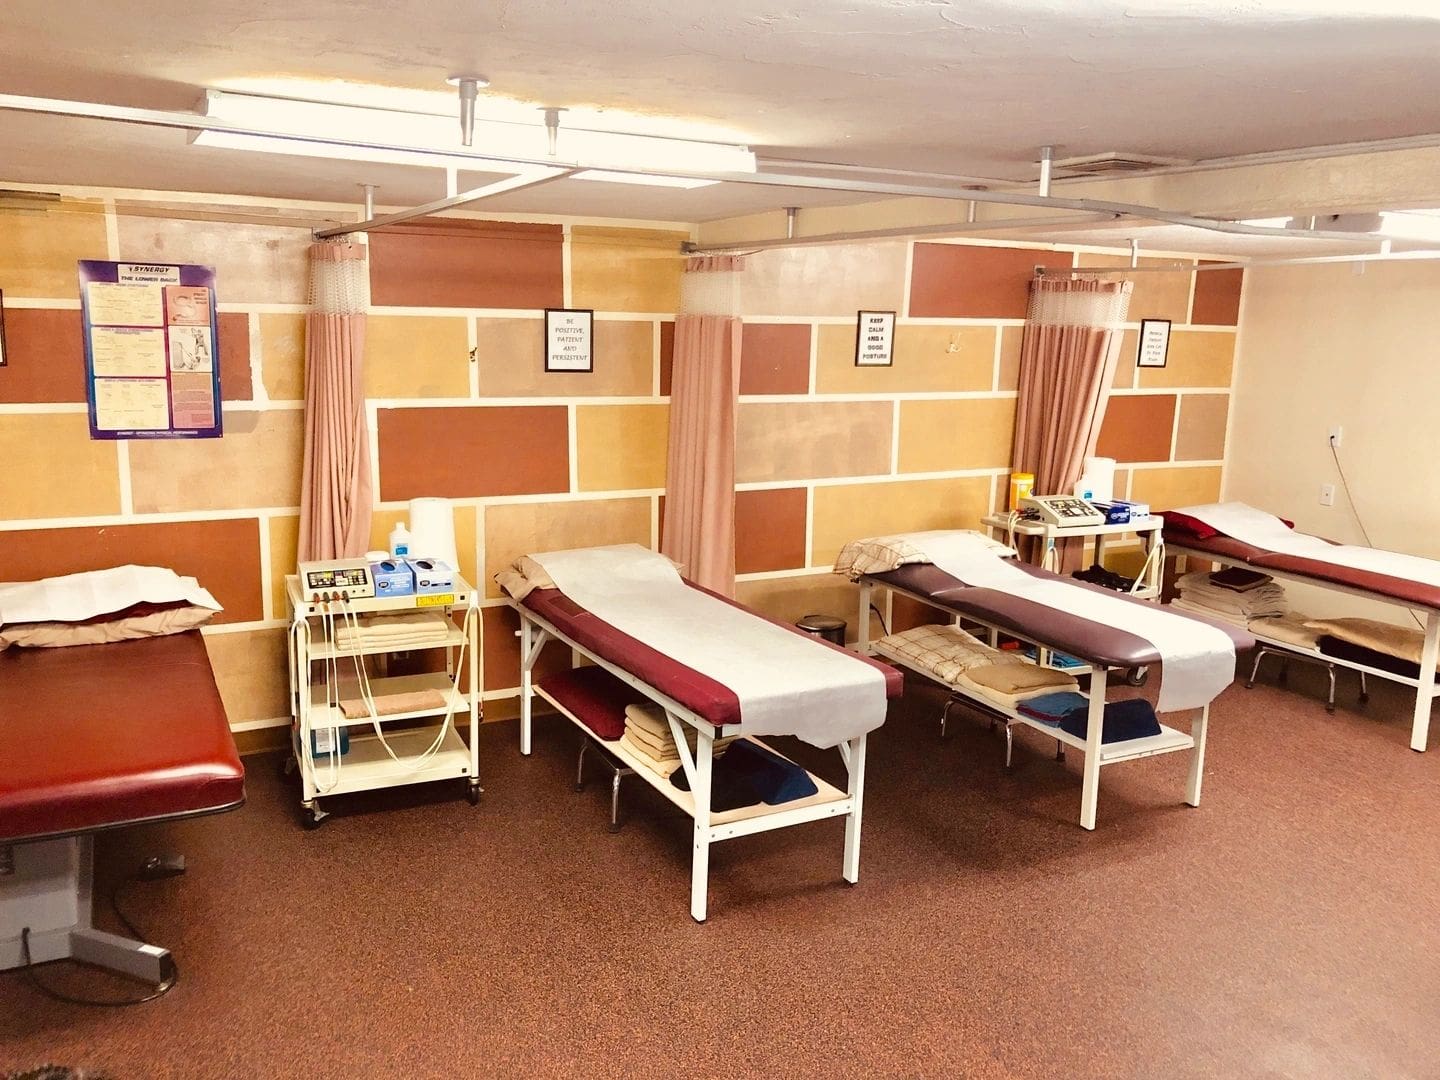 A room with several beds in it